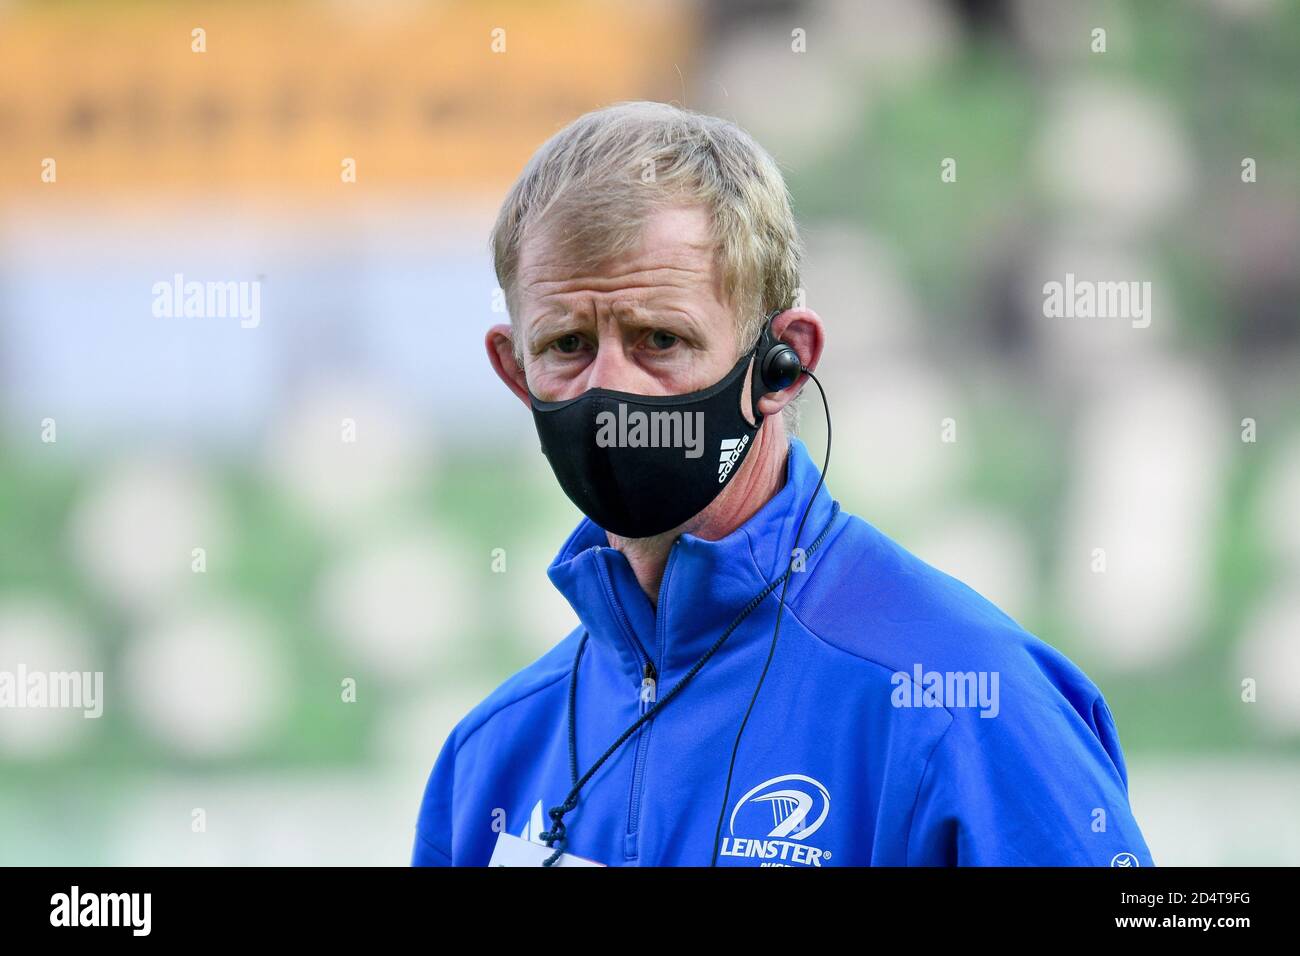 eo Cullen (Coach Leinster Rugby) during Benetton Treviso vs Leinster Rugby, Rugby Guinness Pro 14, Treviso, Italy, 10 Oct 2020 Credit: LM/Ettore Griff Stock Photo